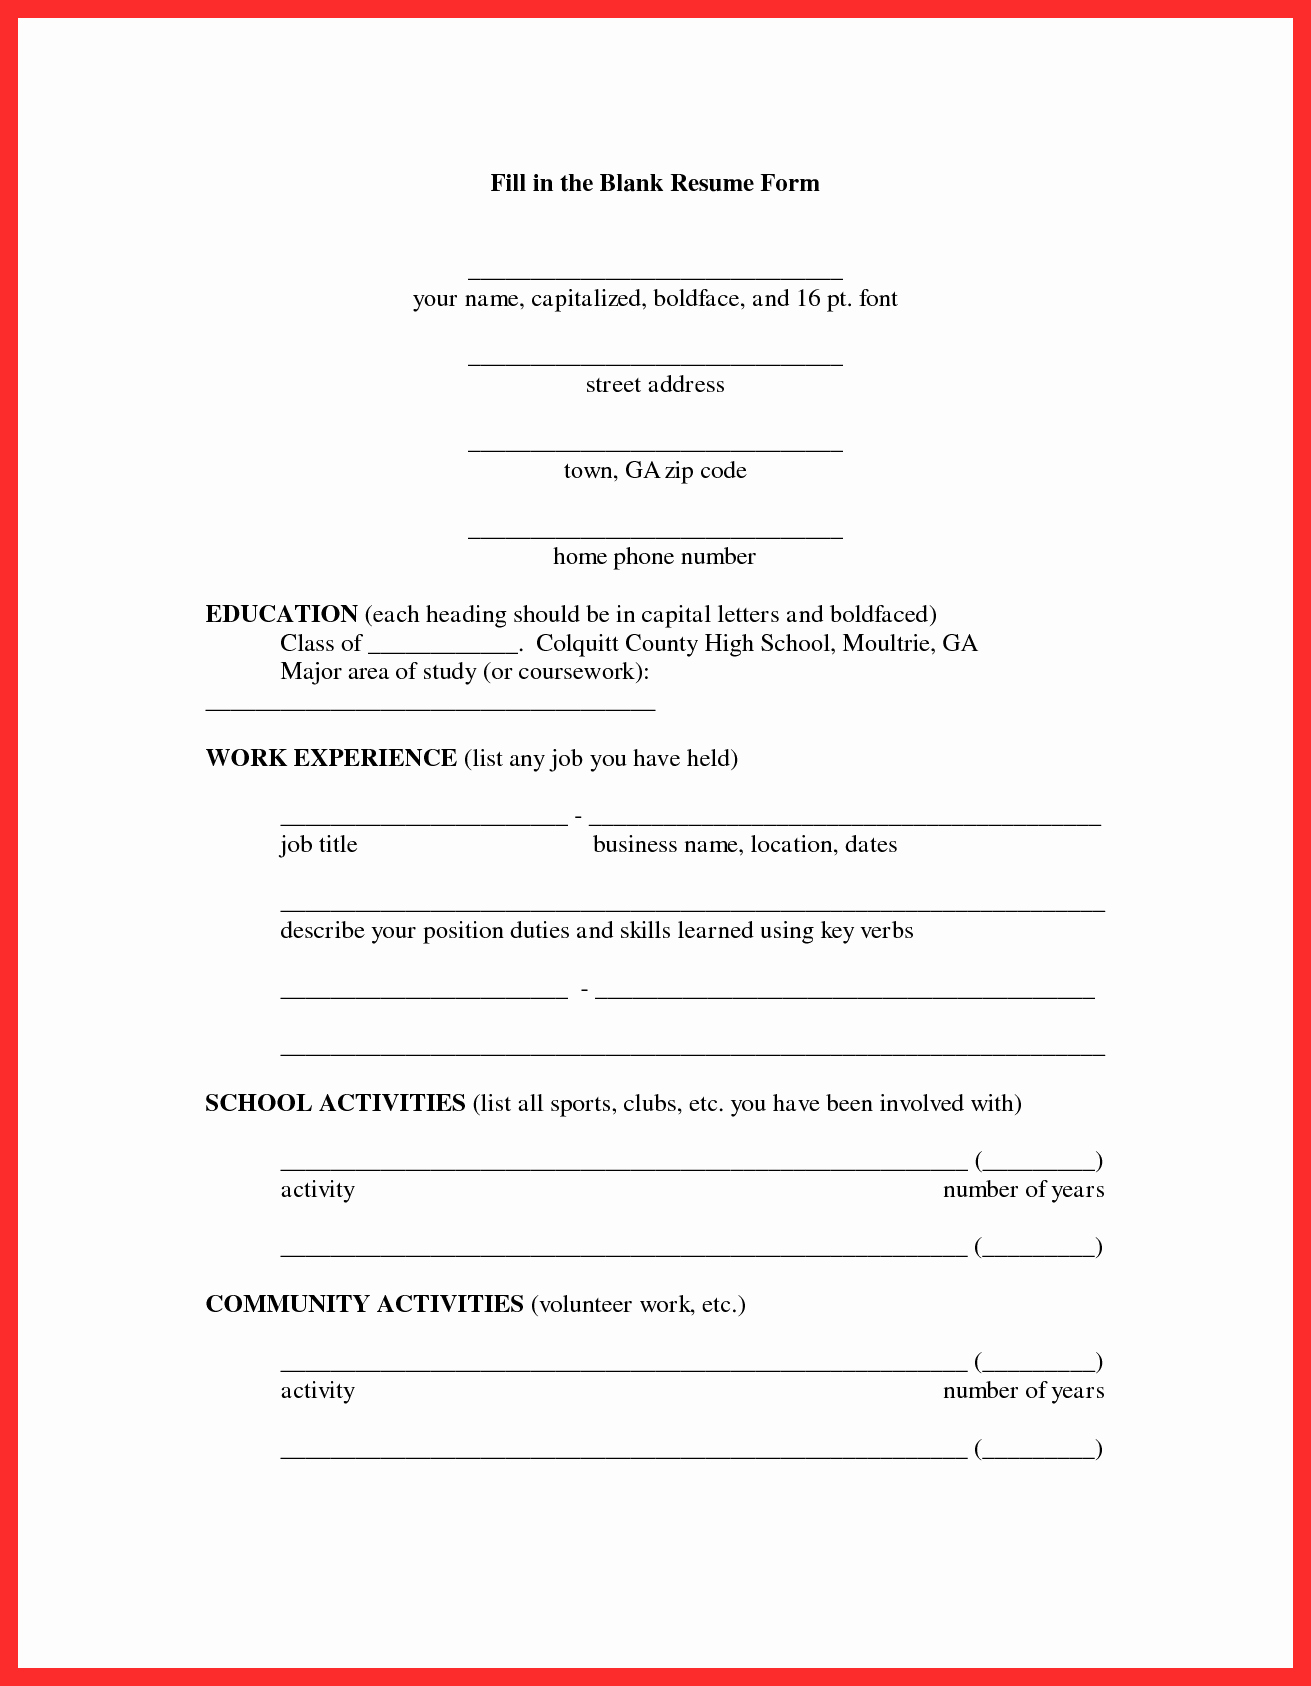 Free Resume Templates Download Pdf Lovely Fill In Resume form